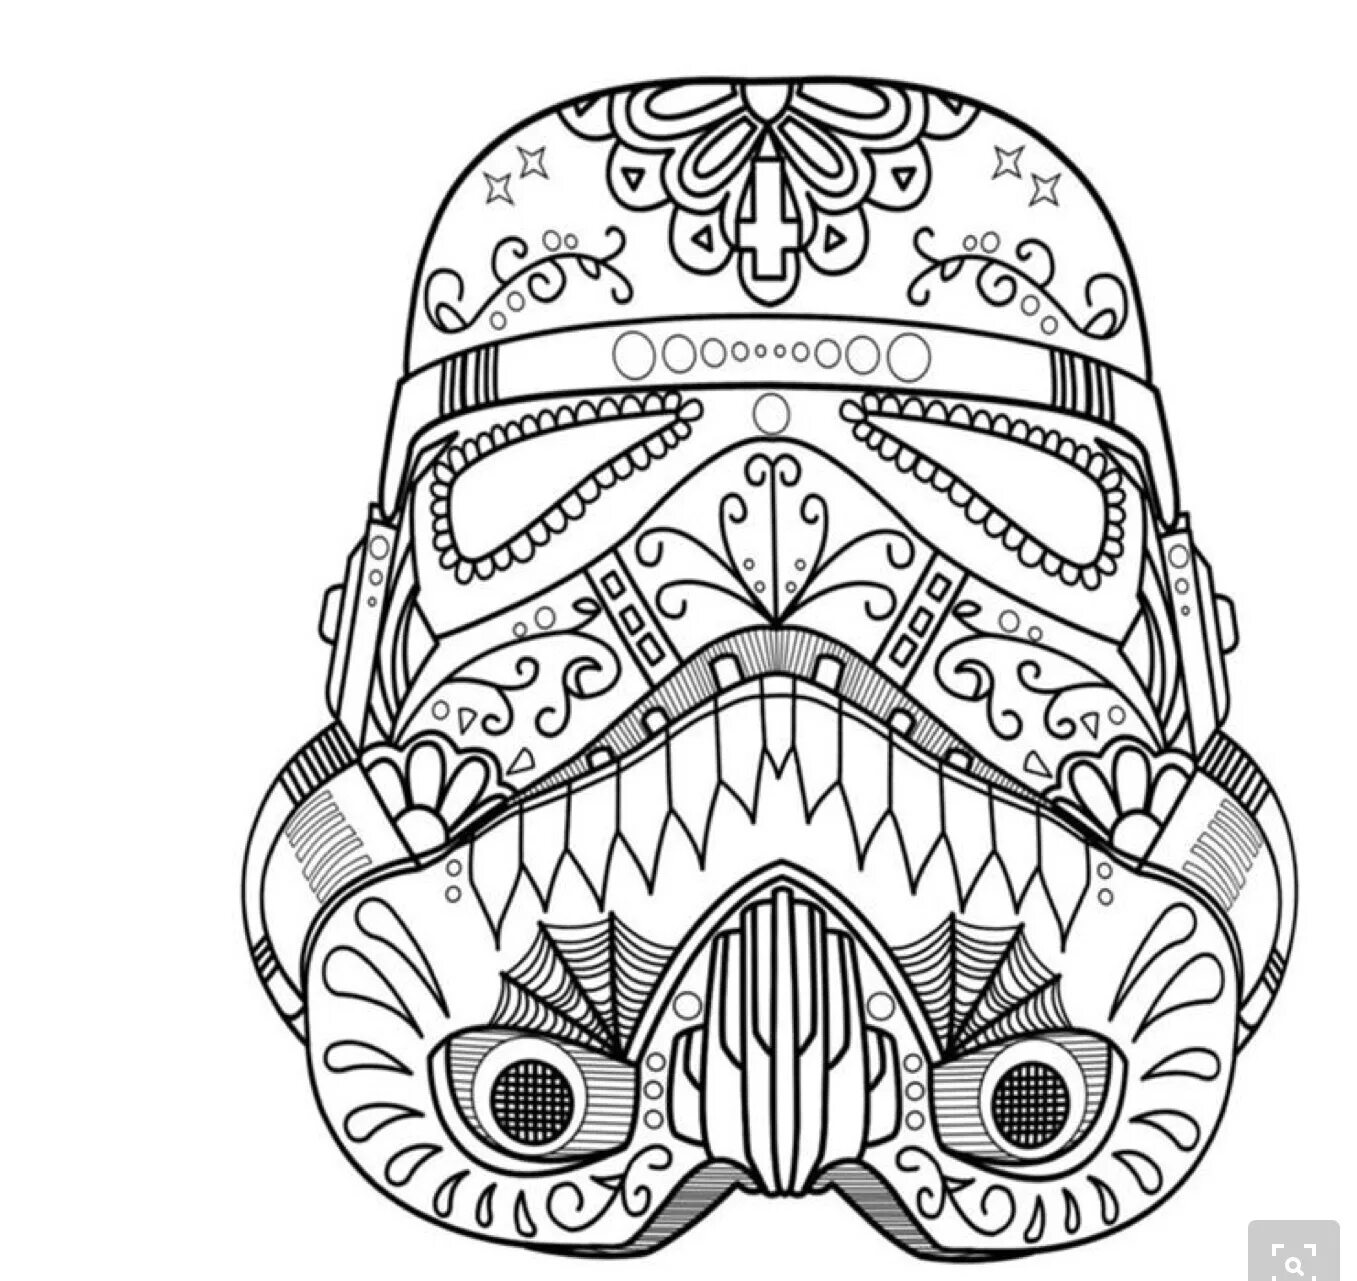 Delightful coloring book for men and adults